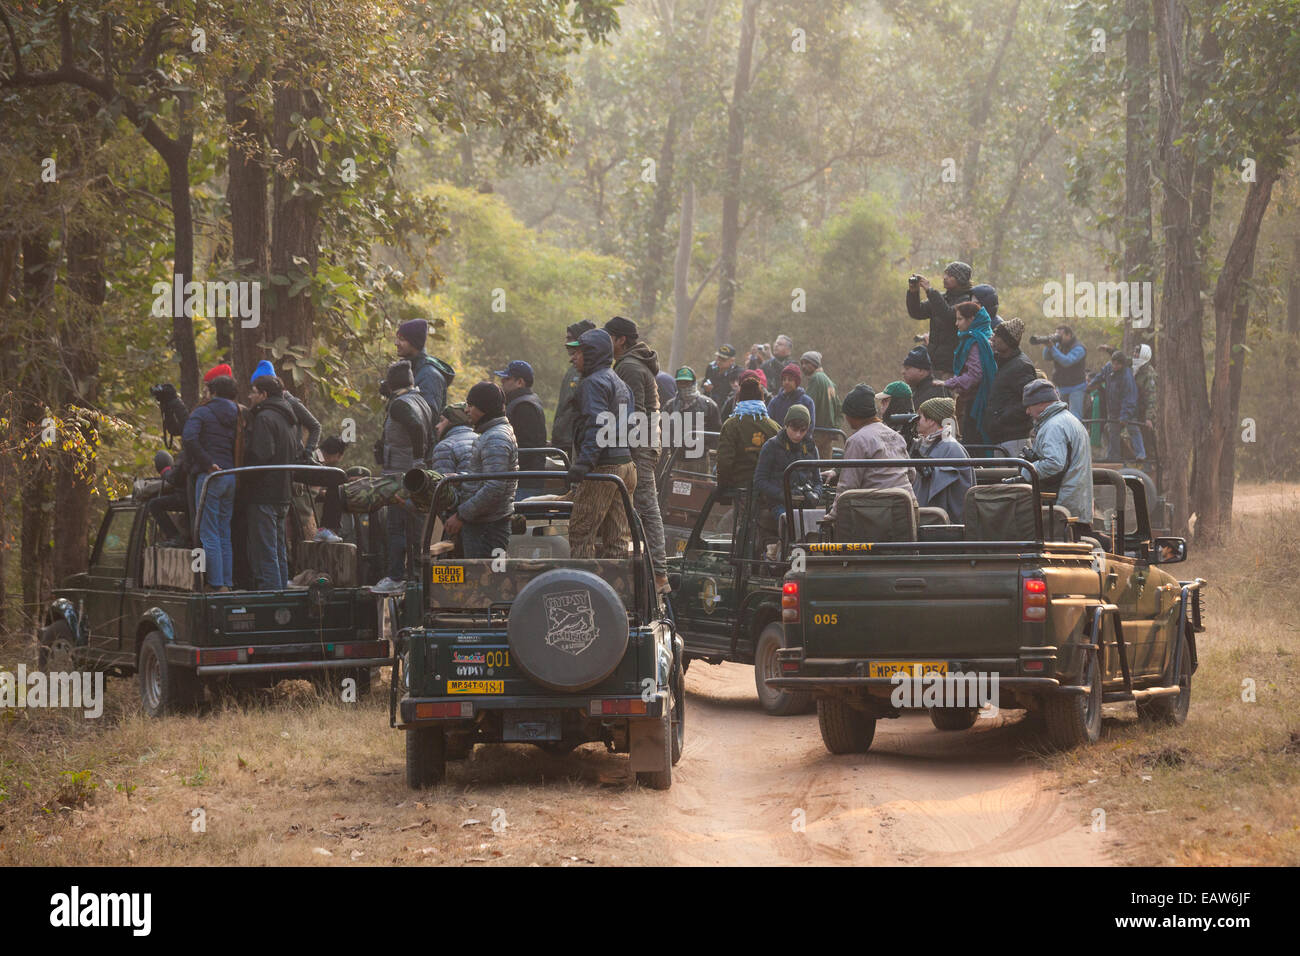 A jeep crowd gathers after a tiger is sighted in Bandhavgarh National Park in India. Stock Photo